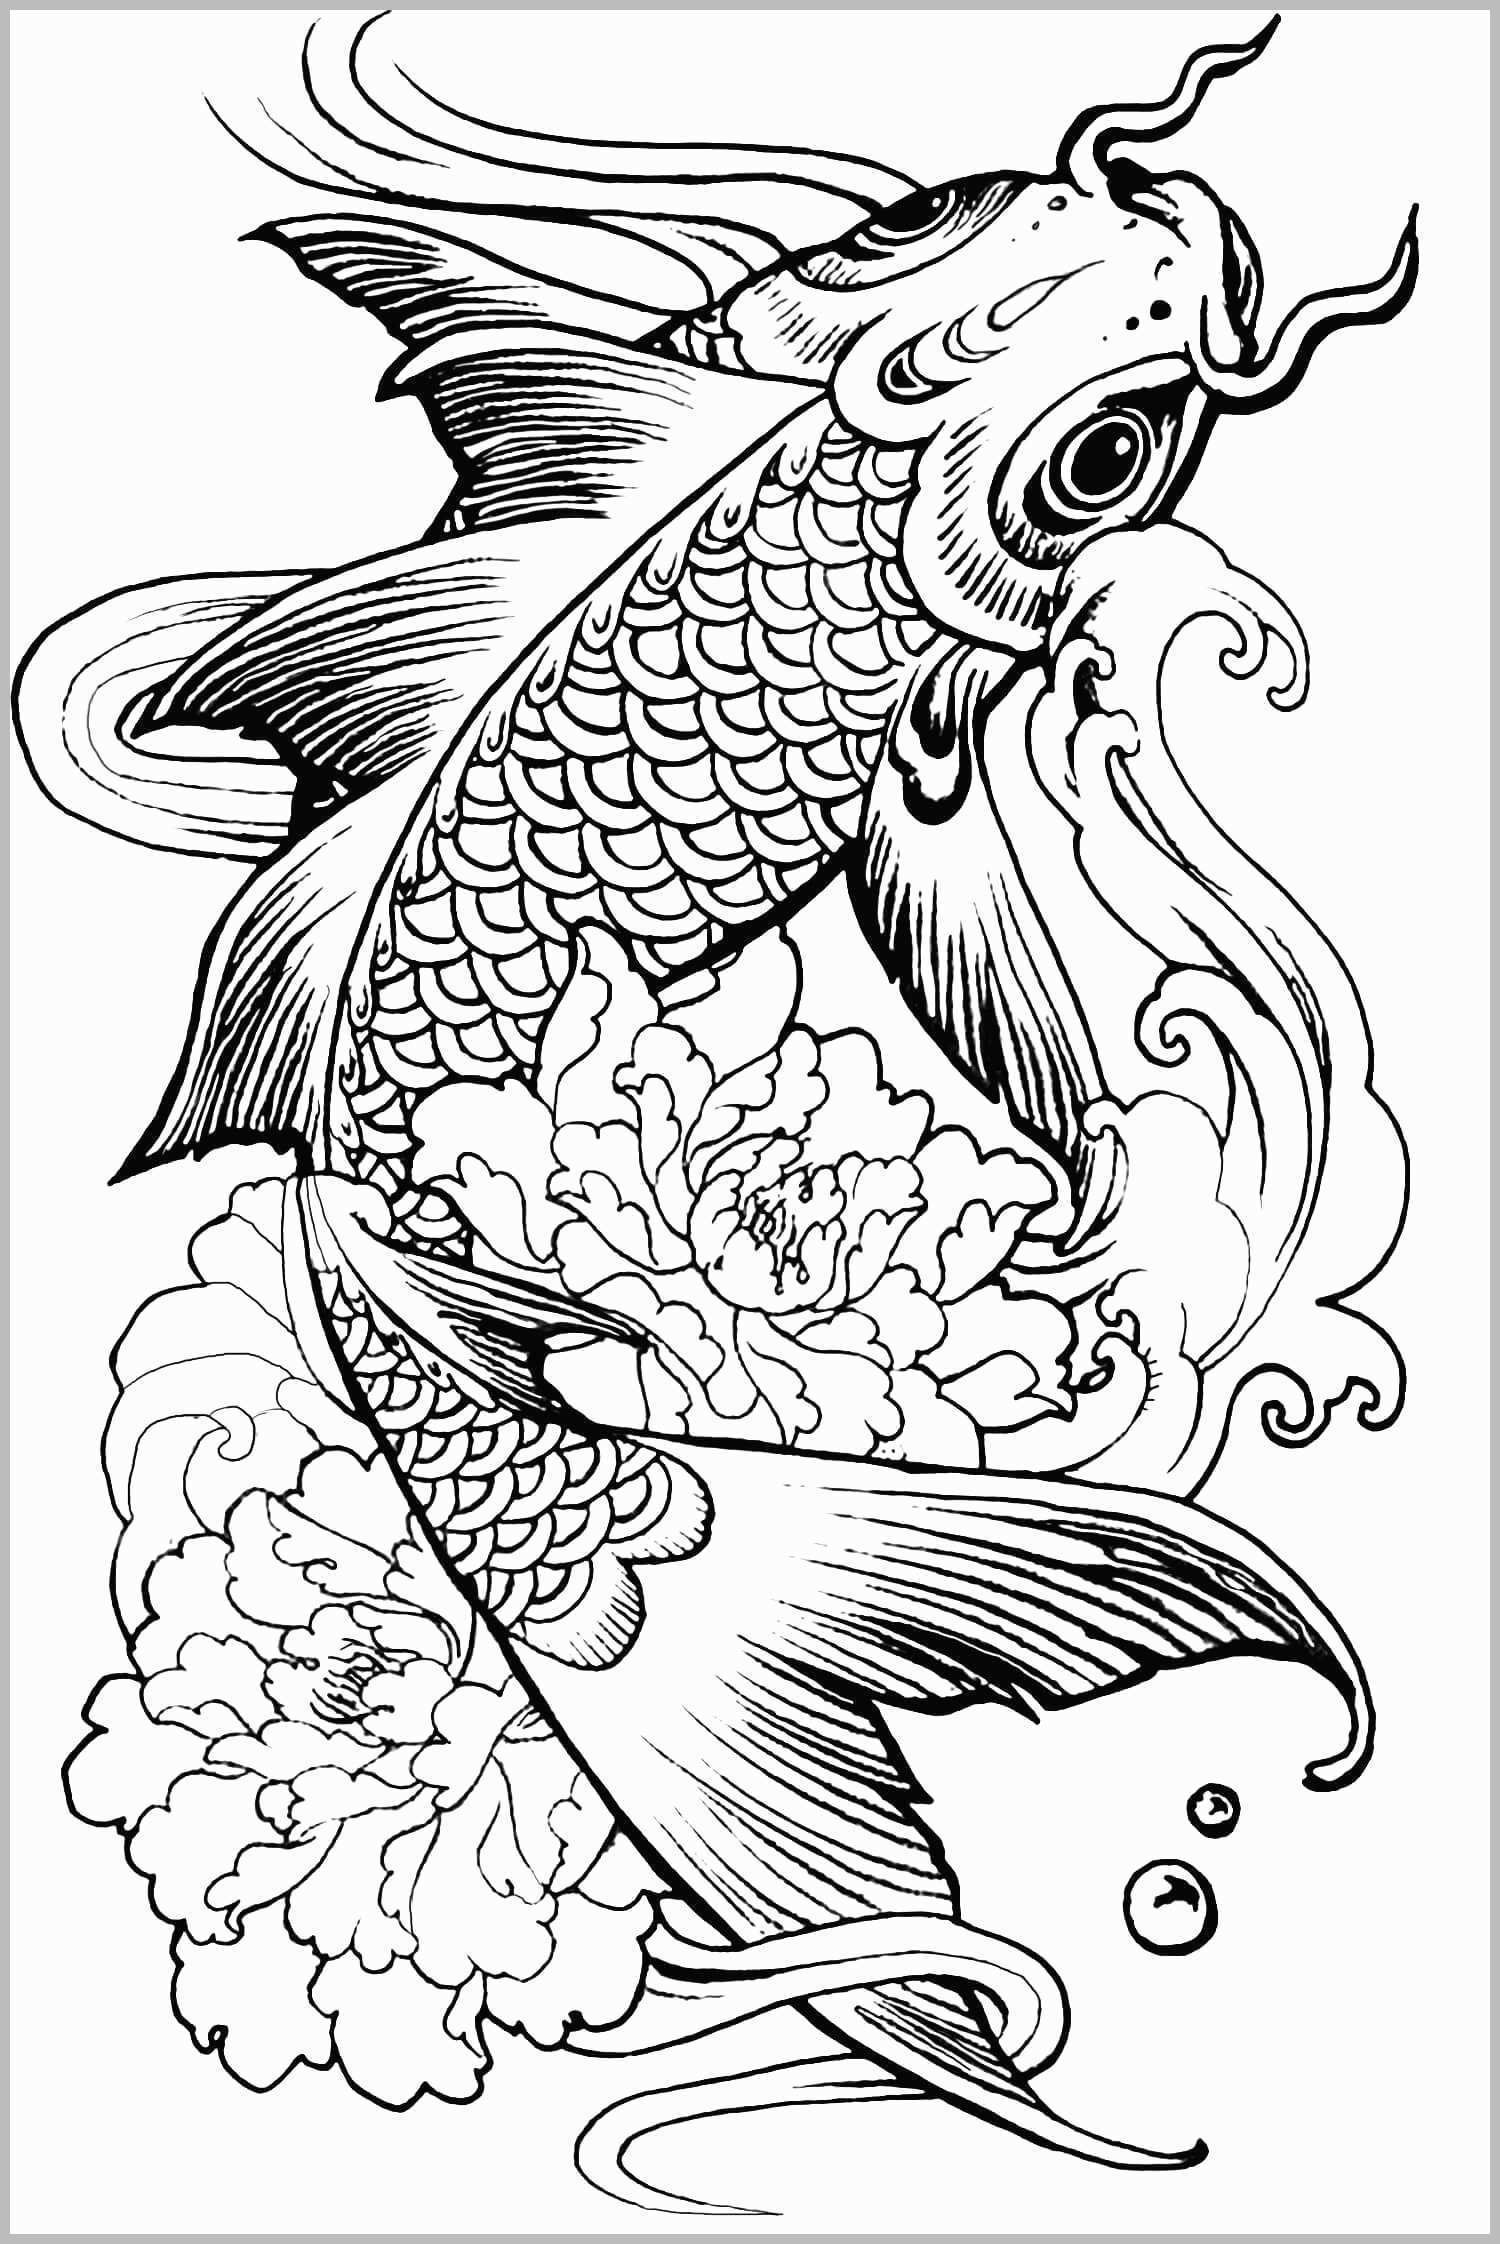 Hard Animal Coloring Pages Images Of Intricate Coloring Pages Animals Sabadaphnecottage